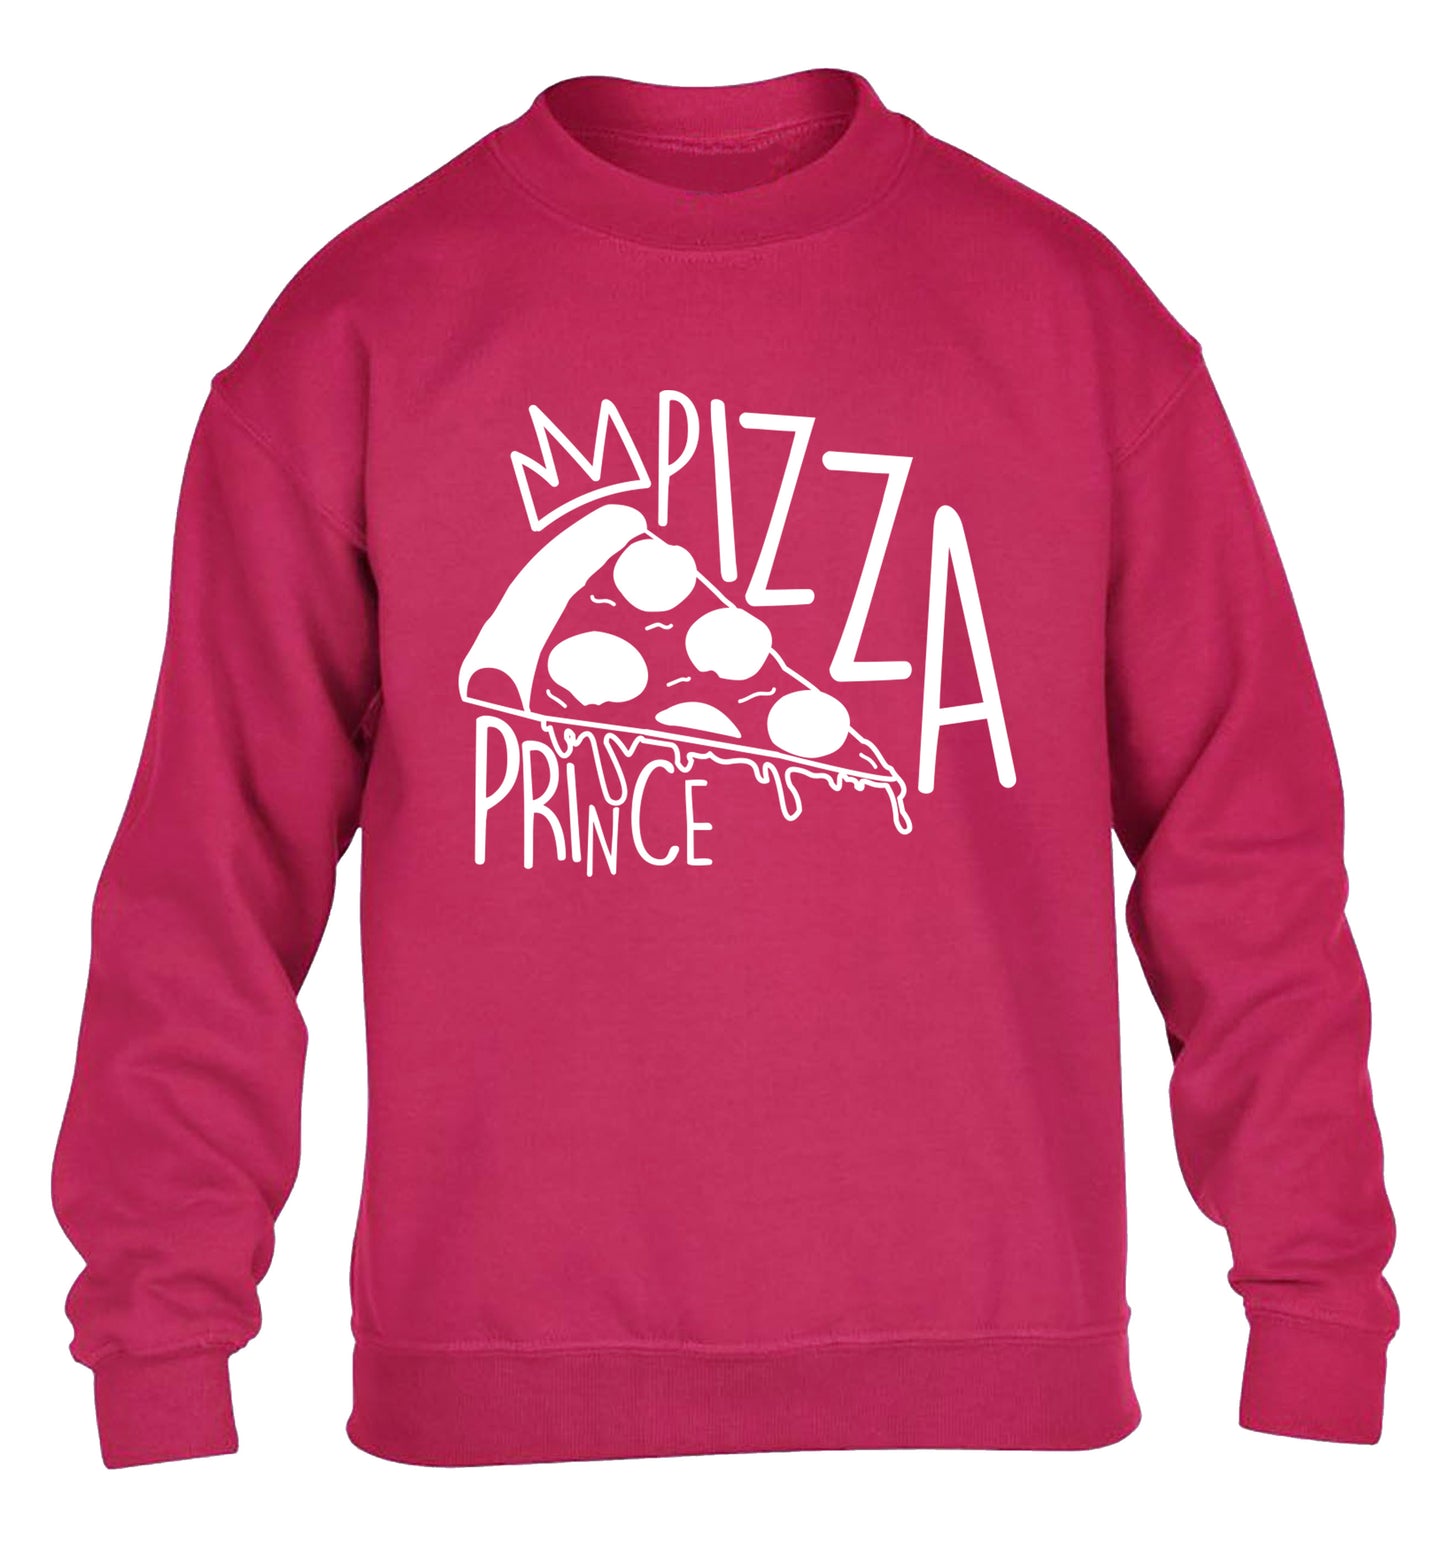 Pizza Prince children's pink sweater 12-13 Years